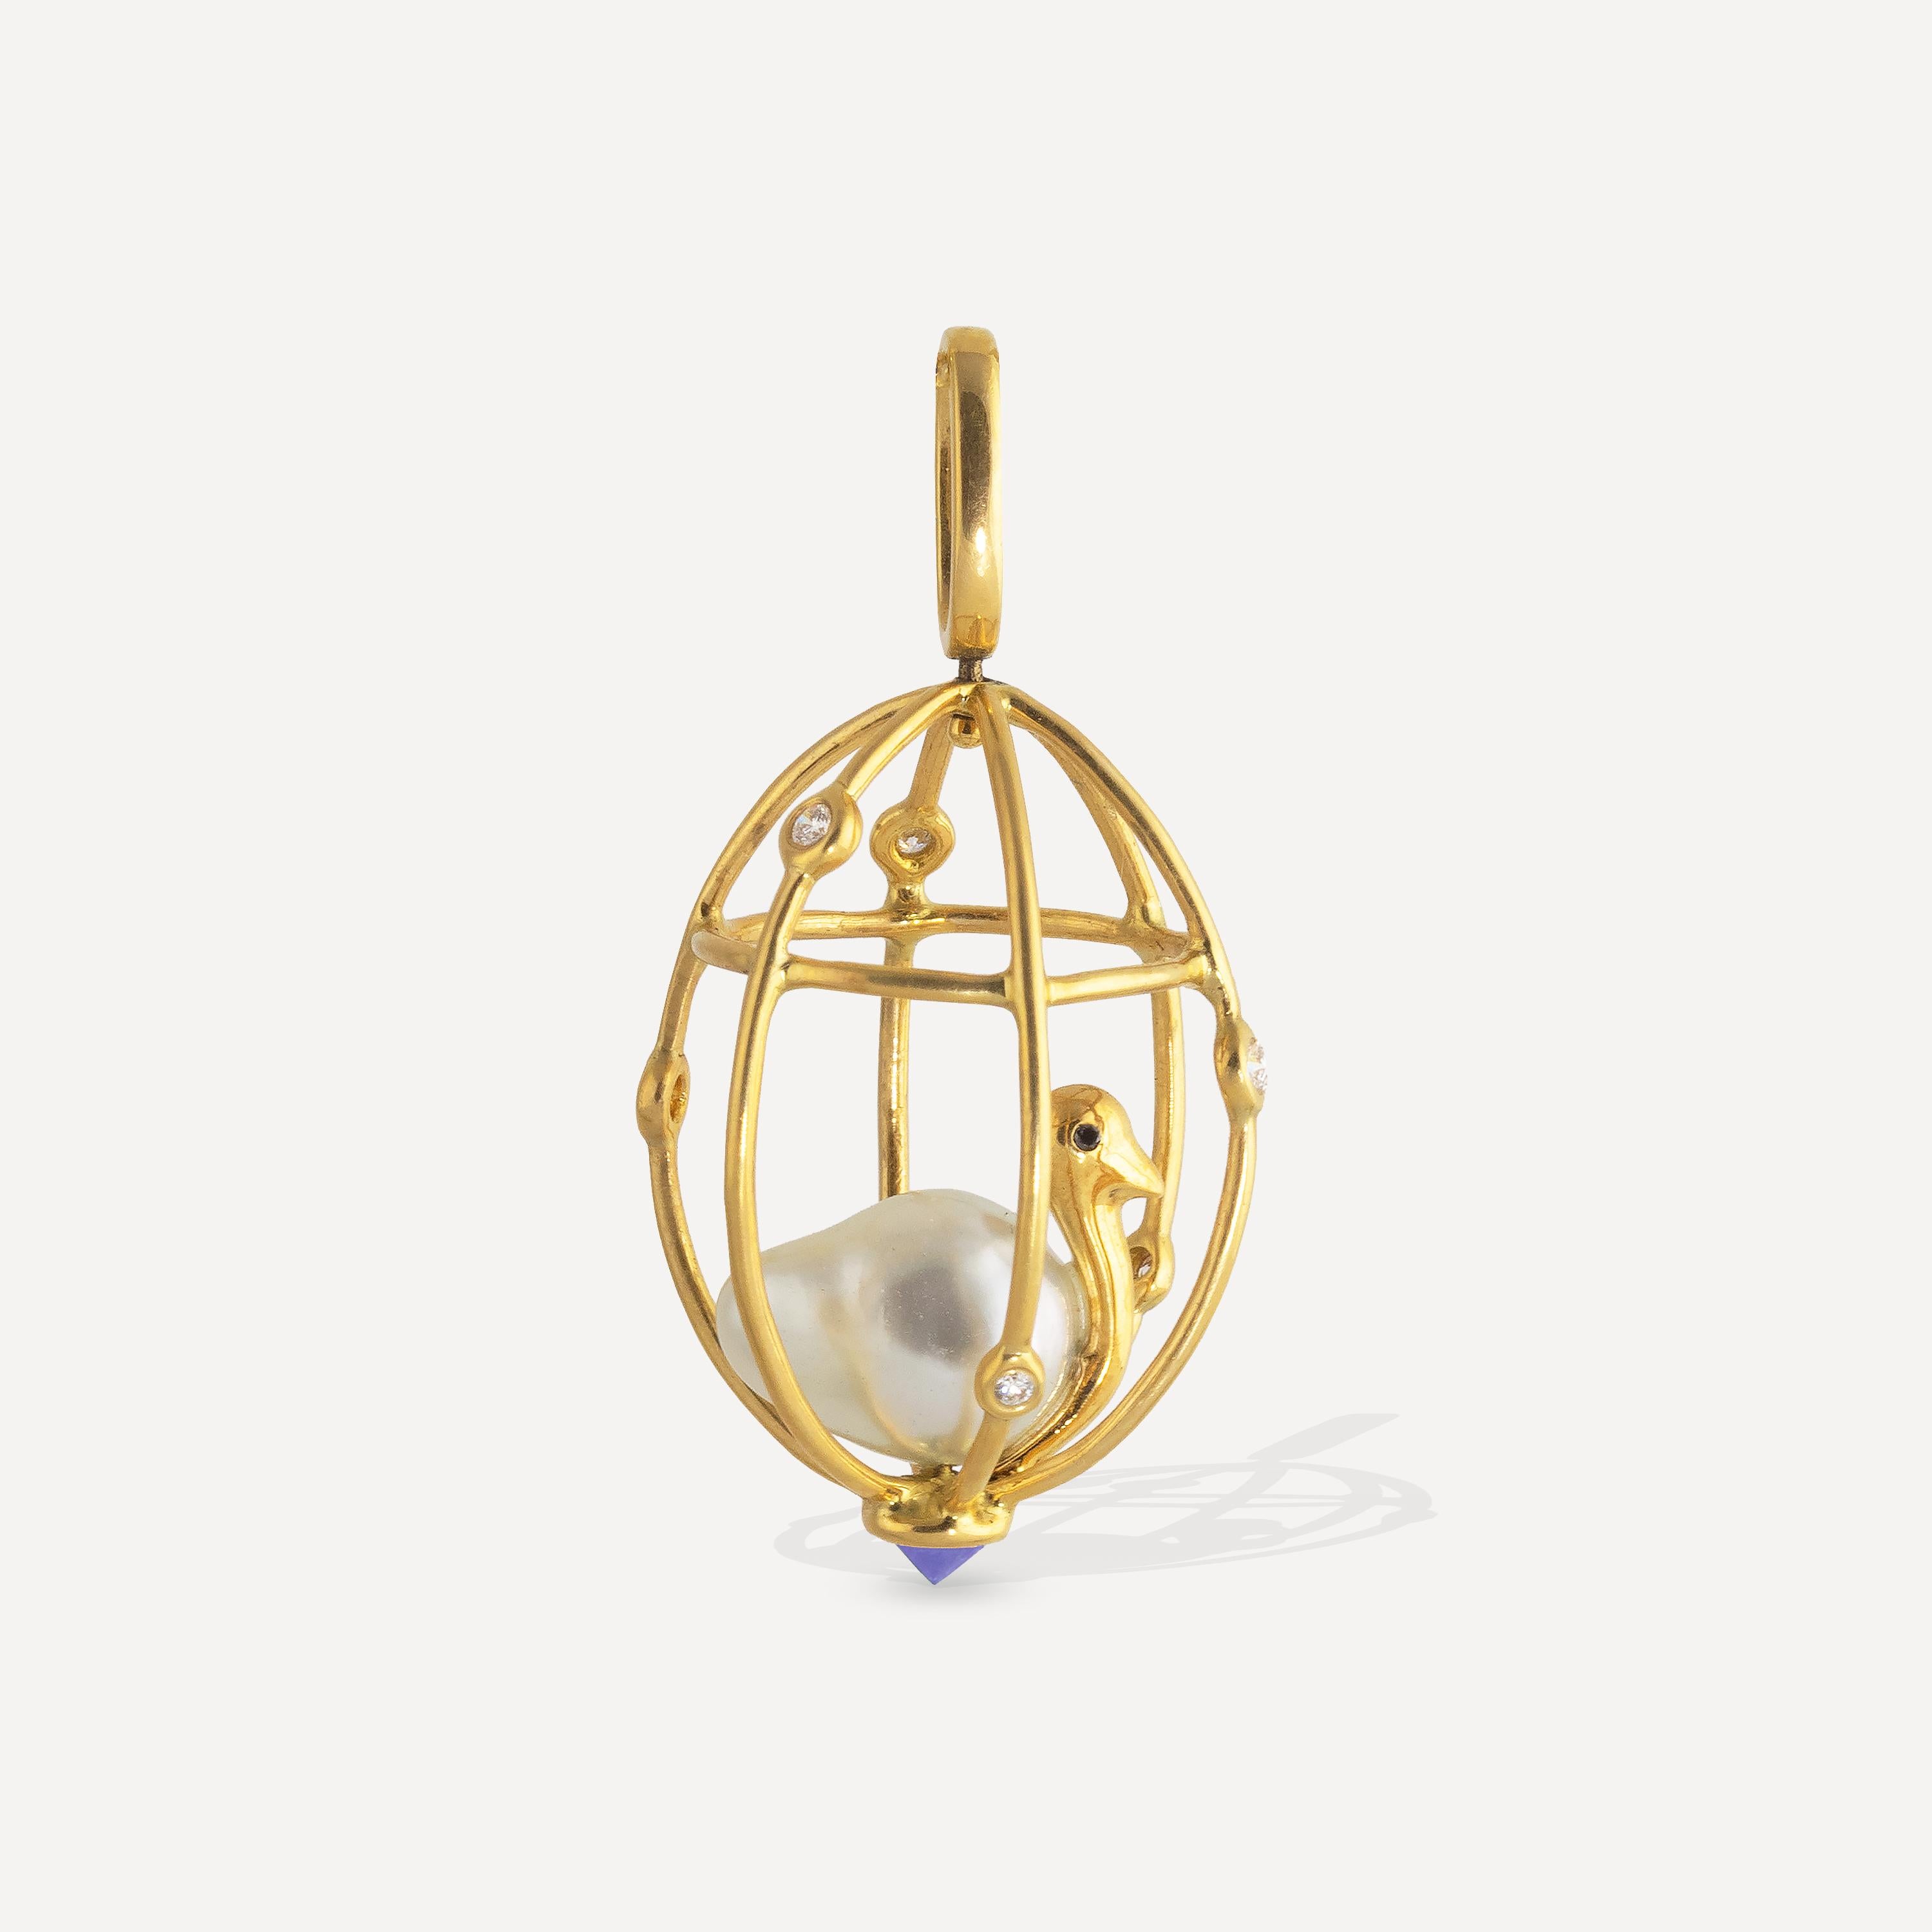 Perched inside this 18k diamond studded cage is a delicate bird; its body made from a 12mm x 9mm Baroque pearl, black diamond eyes decorating its golden body. The pendant features a reverse set .30 carat tanzanite  at the bottom of the cage and